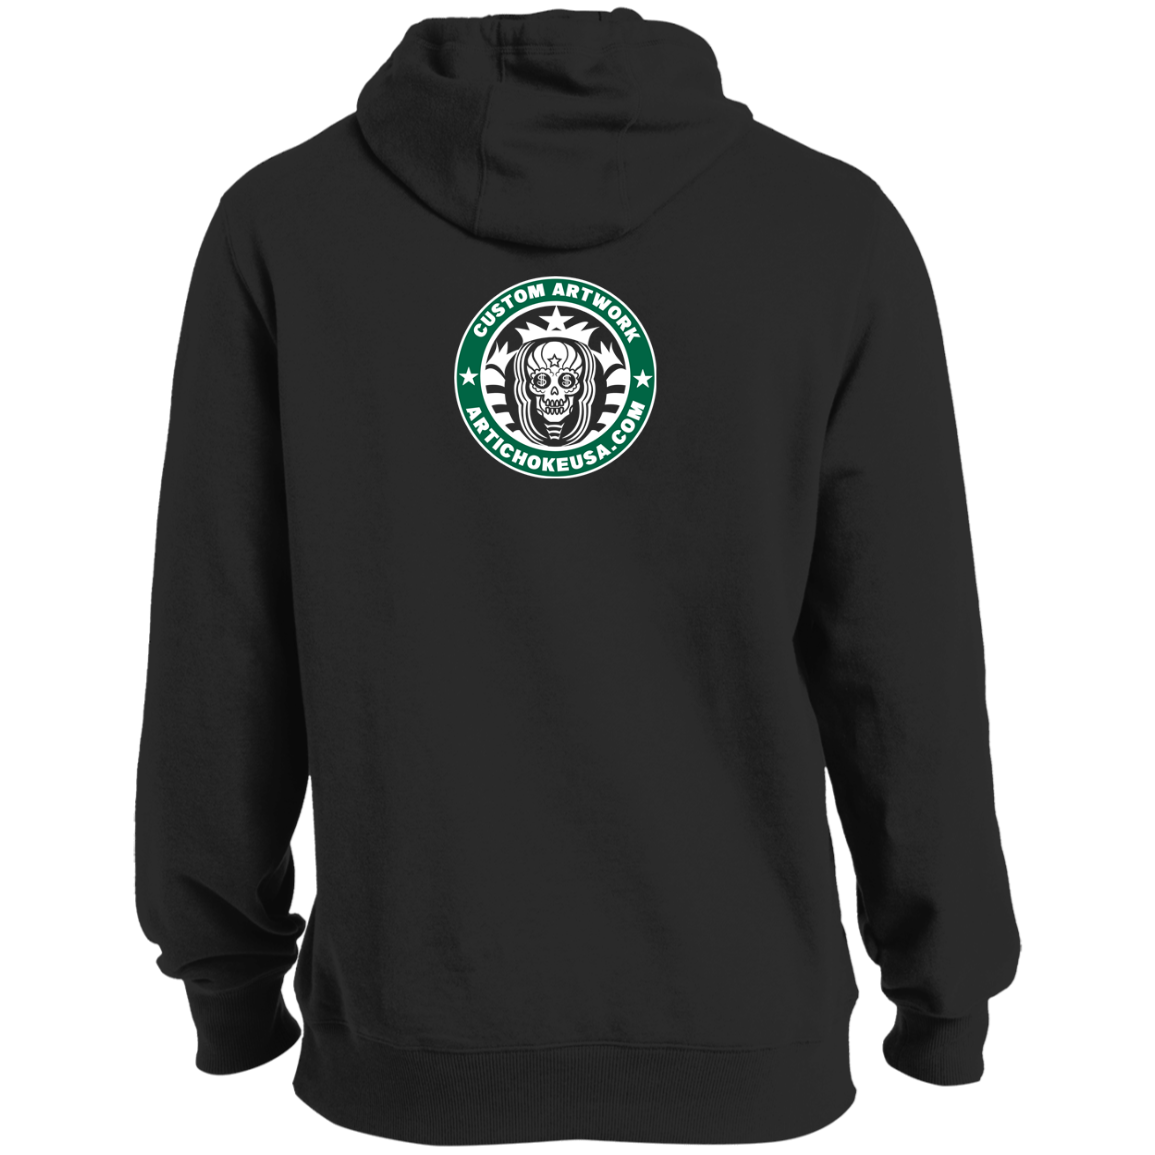 ArtichokeUSA Custom Design. Money Can't Buy Happiness But It Can Buy You Coffee. Ultra Soft Pullover Hoodie